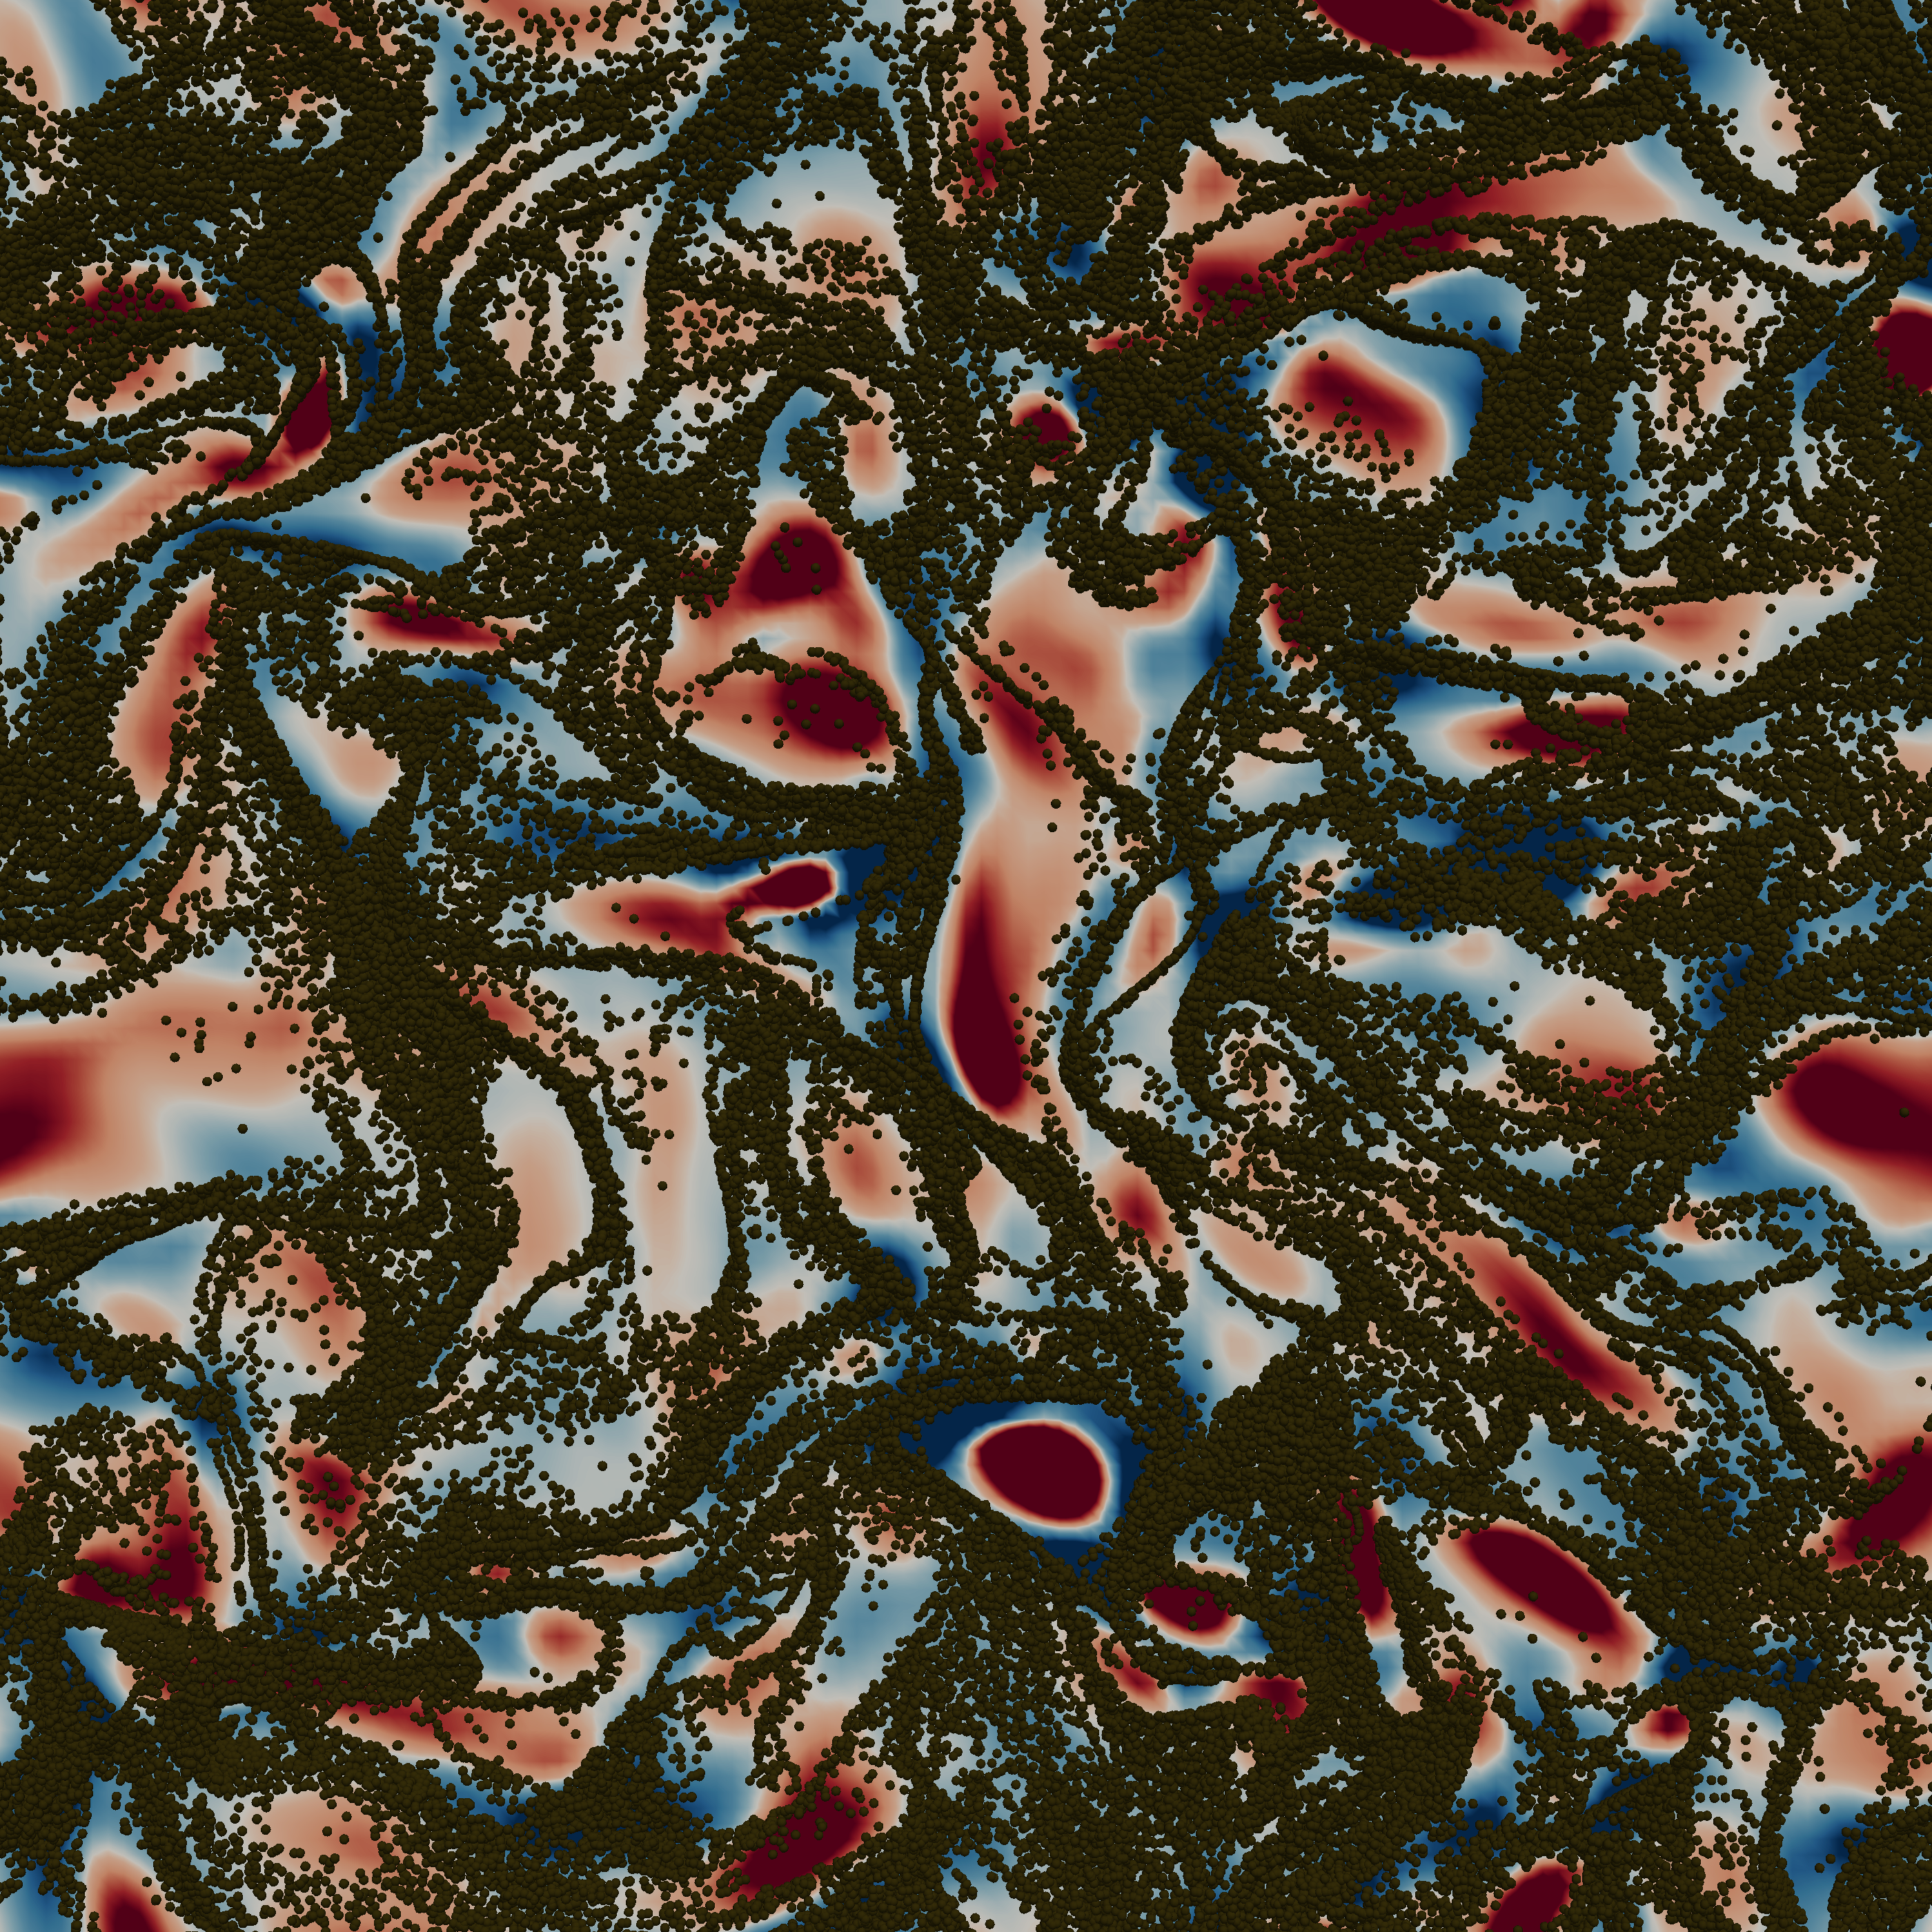 <p>Slice from a 3D two-way coupled DNS homogeneous isotropic turbulent flow containing 20 million solid particles. The background represents the Okubo-Weiss parameter, with particles avoiding red zones (vorticity overwhelms strain) and concentrating in the blue regions (the opposite). Taylor Reynolds is 35.4, Stokes 0.4 and mass loading 0.5.</p>
